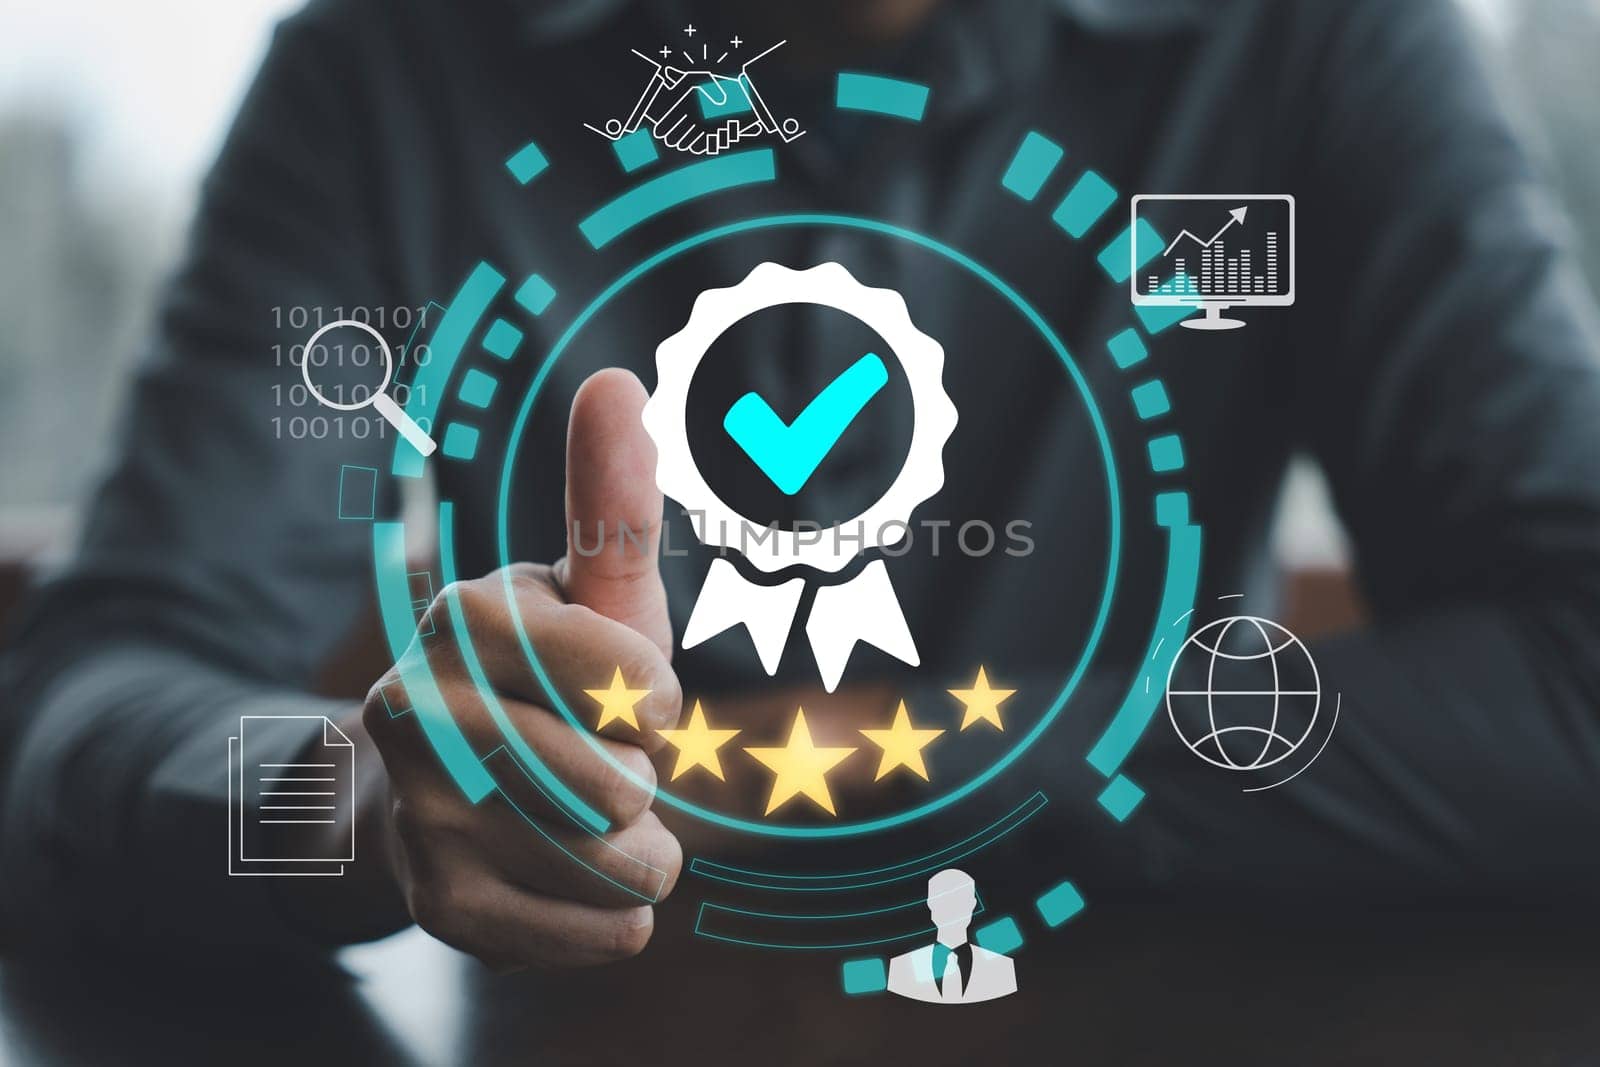 Standardizing products and services in business, ISO certification and quality auditor support. Businessman giving thumbs up to show certified assured service. Performance evaluation customer feedback